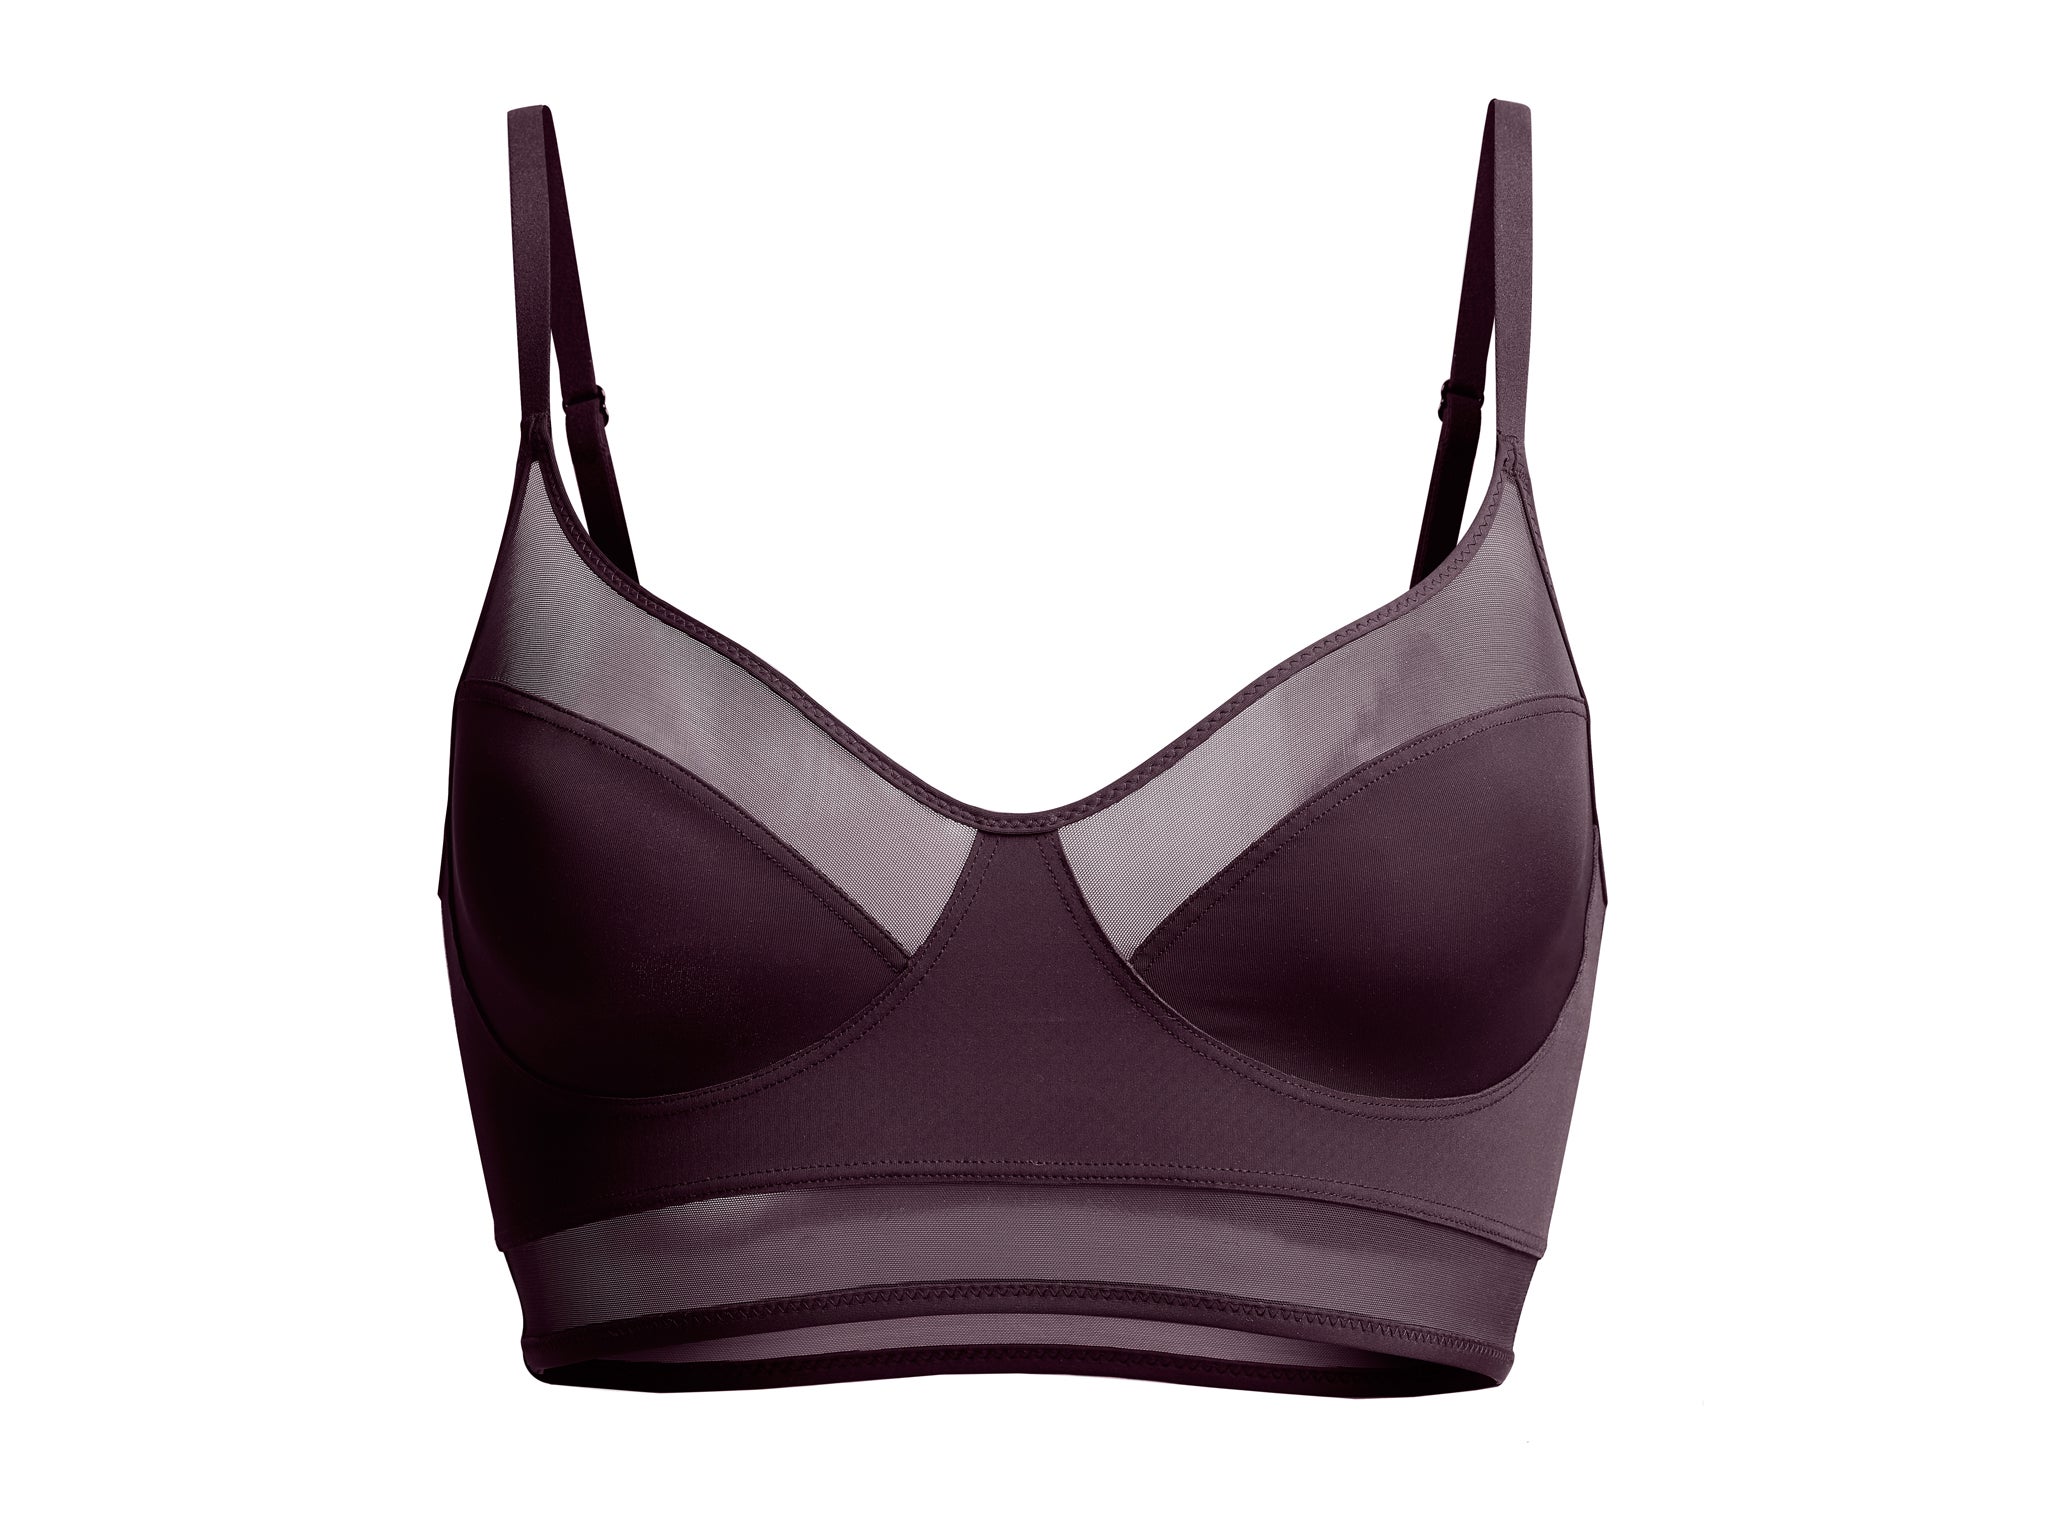 Best bra brands for larger busts that deliver on style, comfort